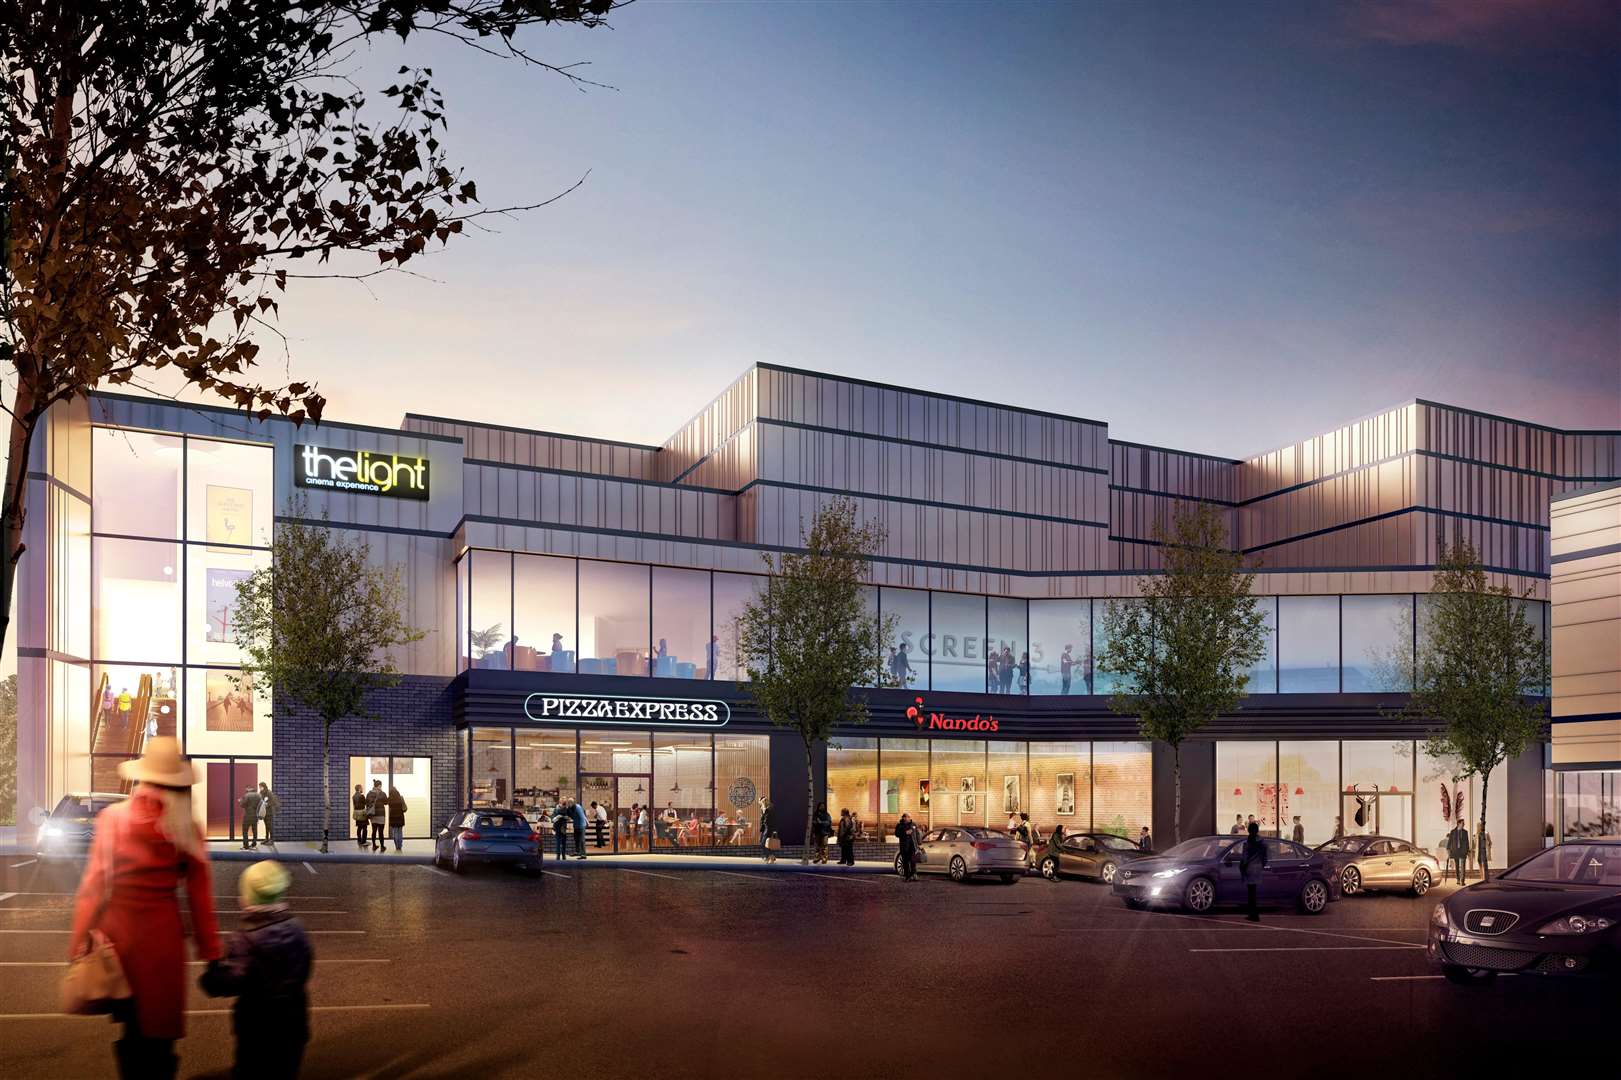 An artist's impression showing Nando's and Pizza Express restaurants in Sittingbourne's new leisure quarter